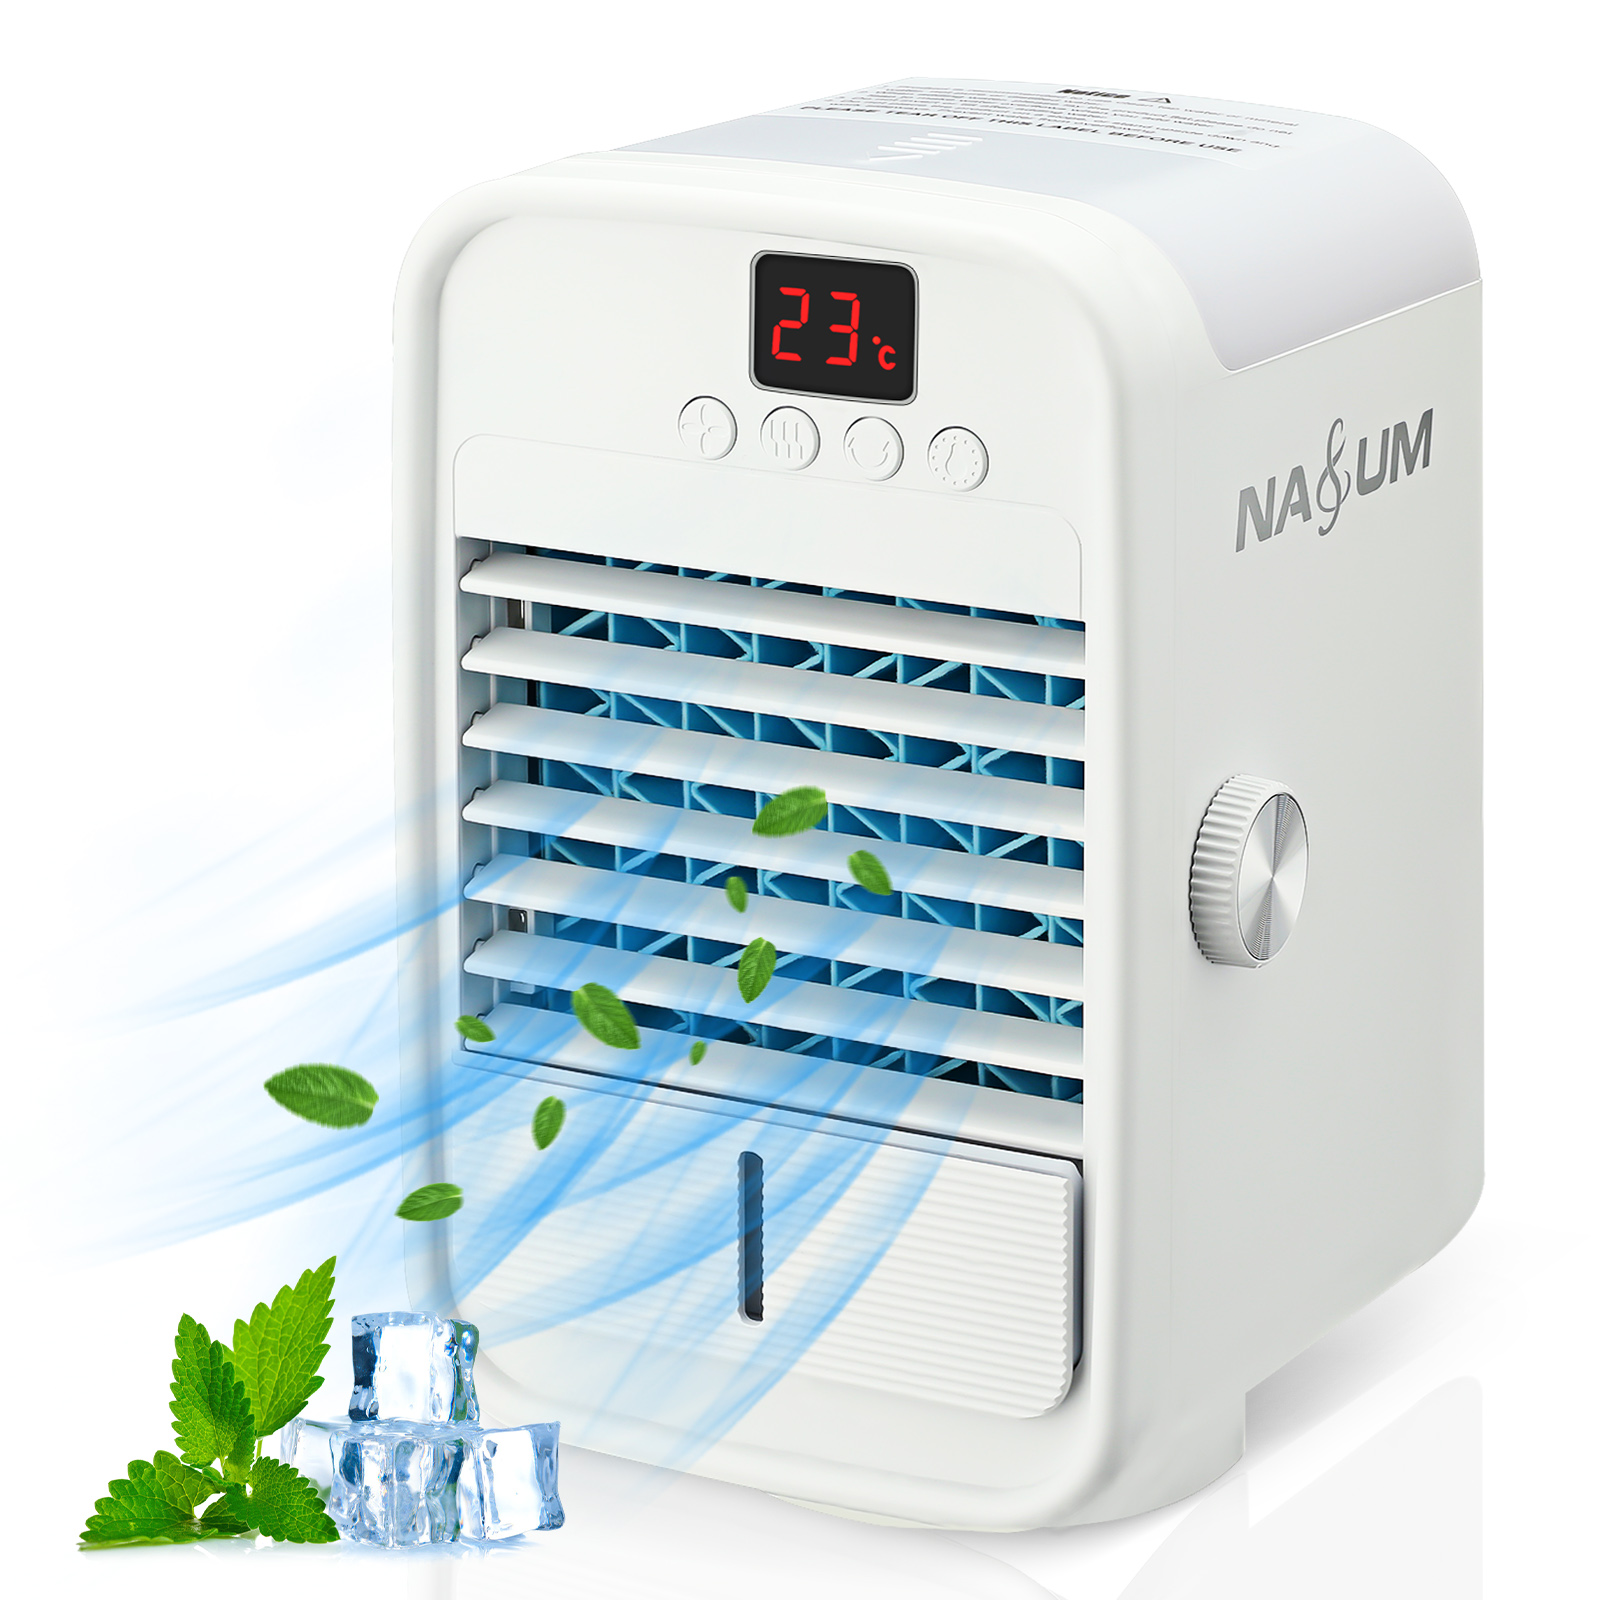 5-in-1-Mini-Air-Cooler-3-Wind-Speed-Adjustment-120deg-Wide-Angle-Rotation-Air-Humidification-Conditi-1885105-1